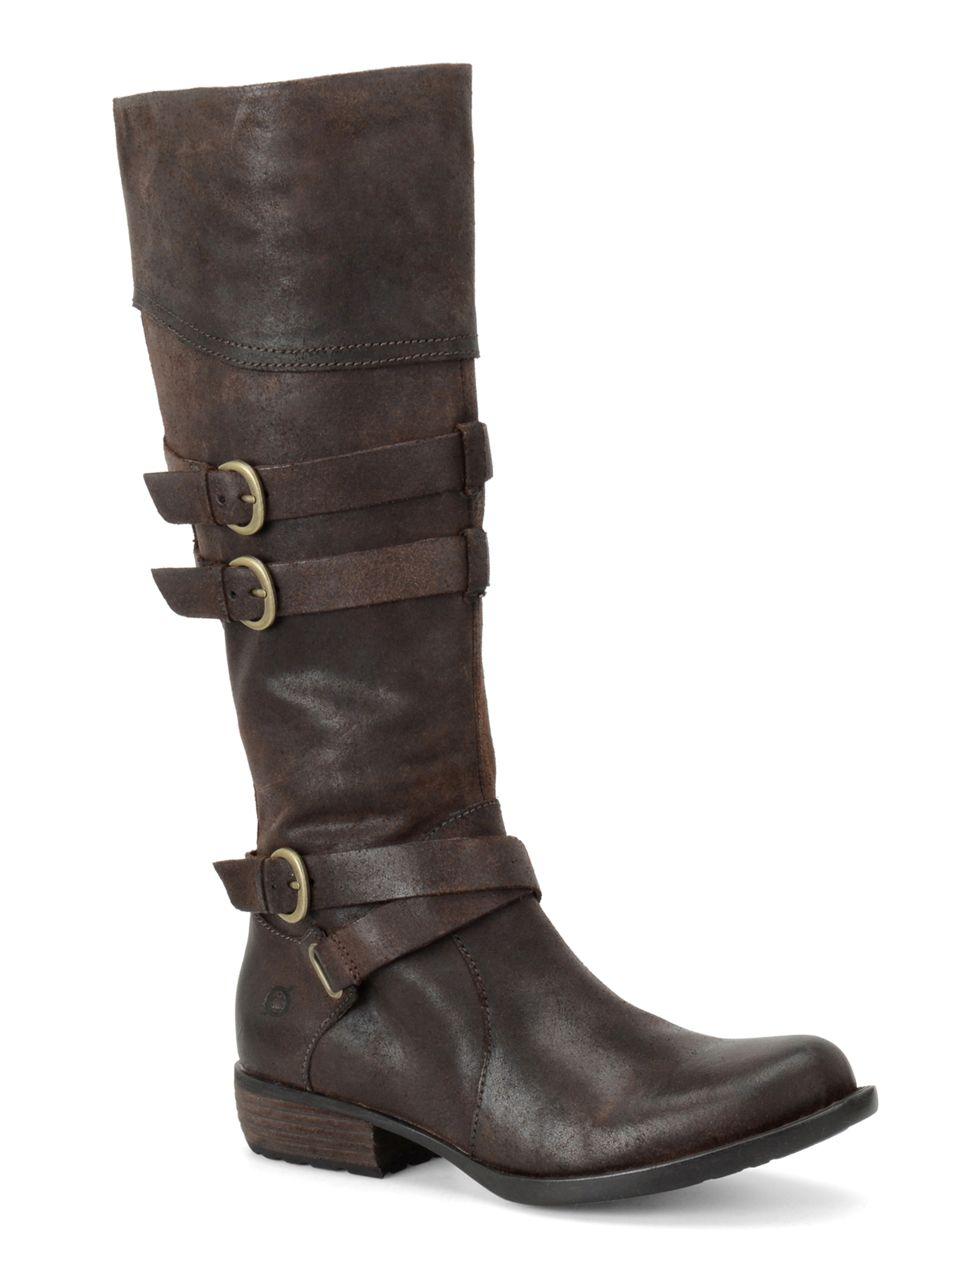 Lyst - Born Odom Buckle Riding Boots in Brown